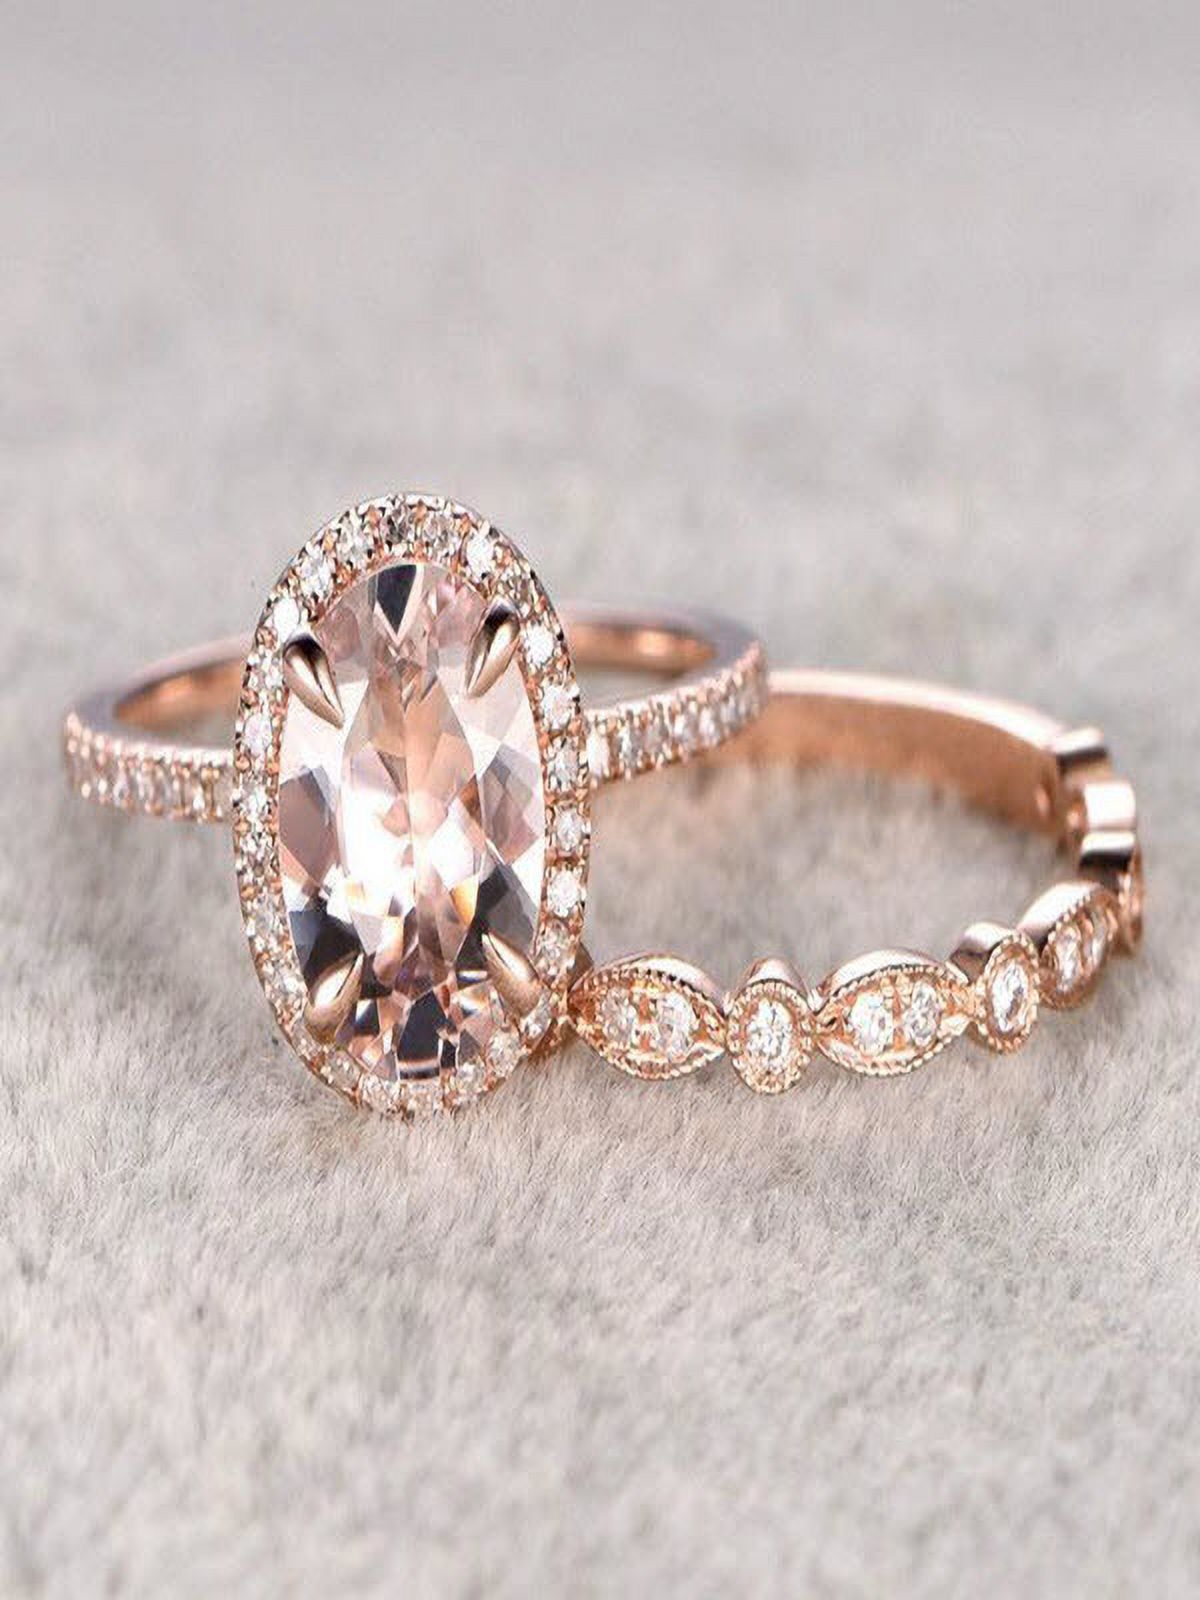 Limited Time Sale 1.50 carat Morganite and Diamond Wedding Bridal Ring Set in 10k Rose Gold, One Engagement Ring & Wedding Band - image 2 of 2